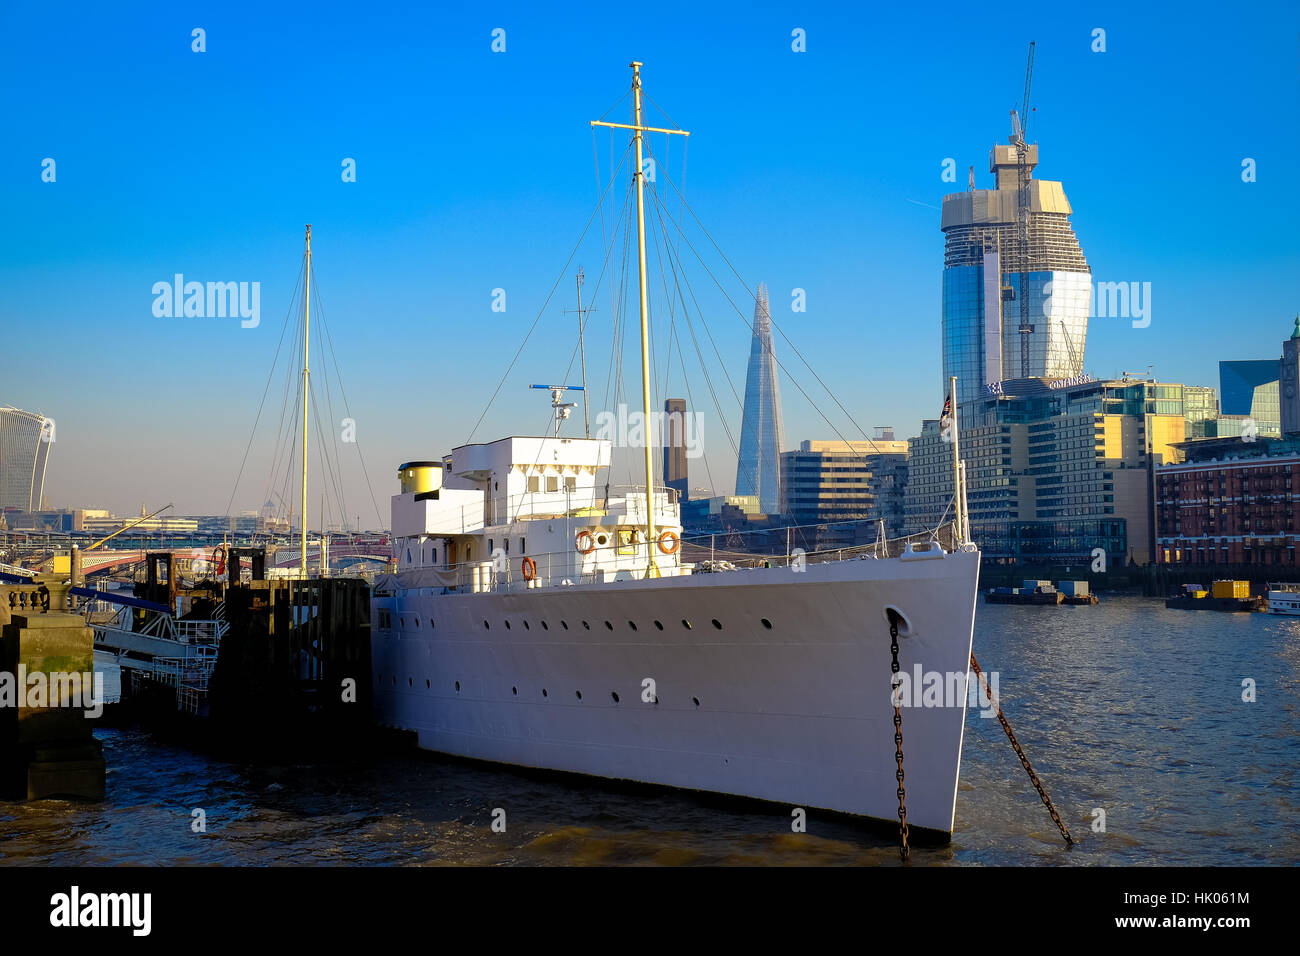 Ship anchored on London's River Thames with skyscrapers in the background Stock Photo